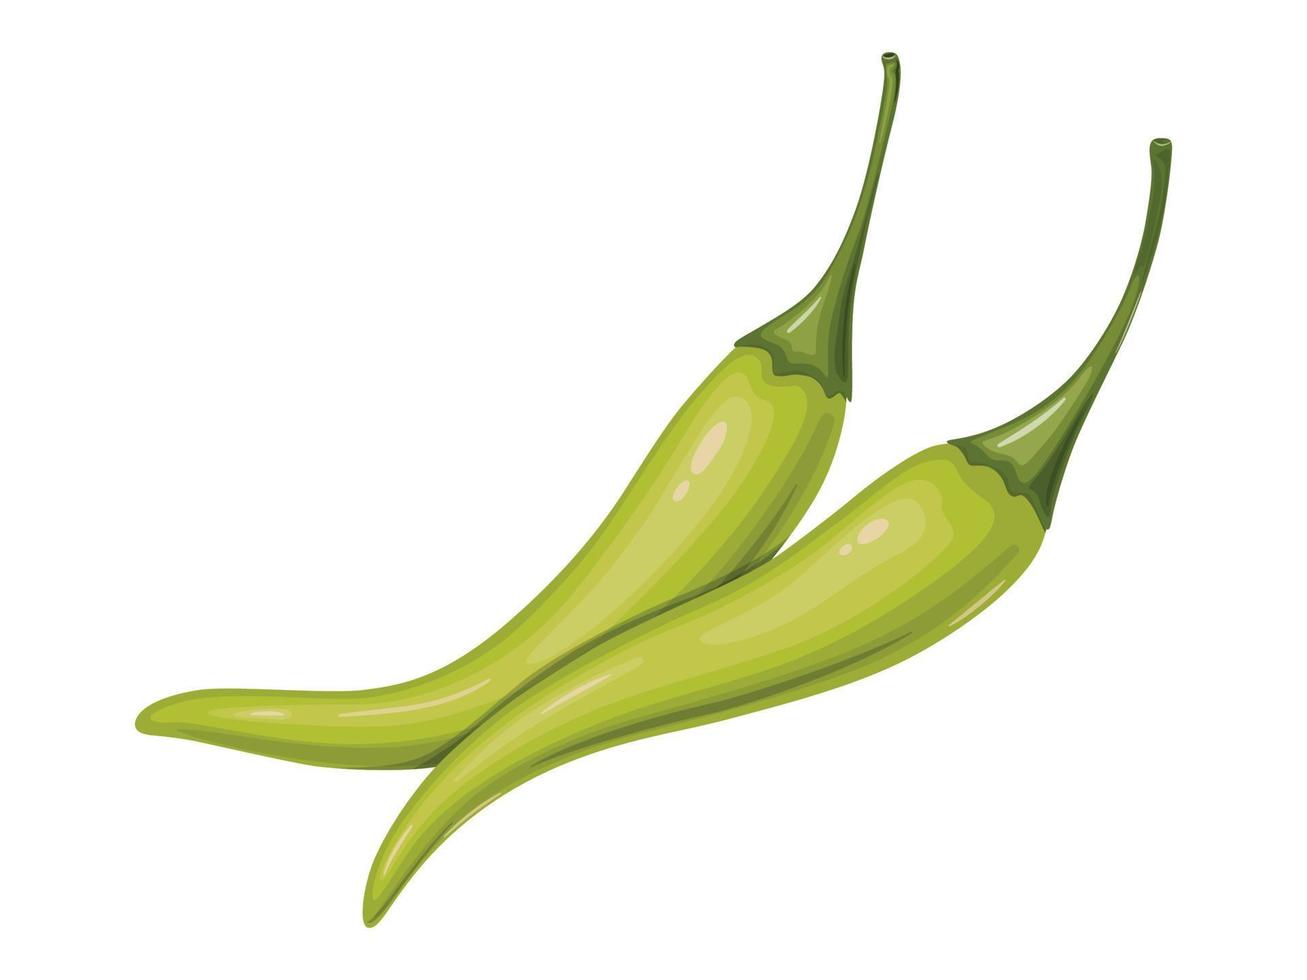 Green hot Chili pepper. Mexican traditional food. vector